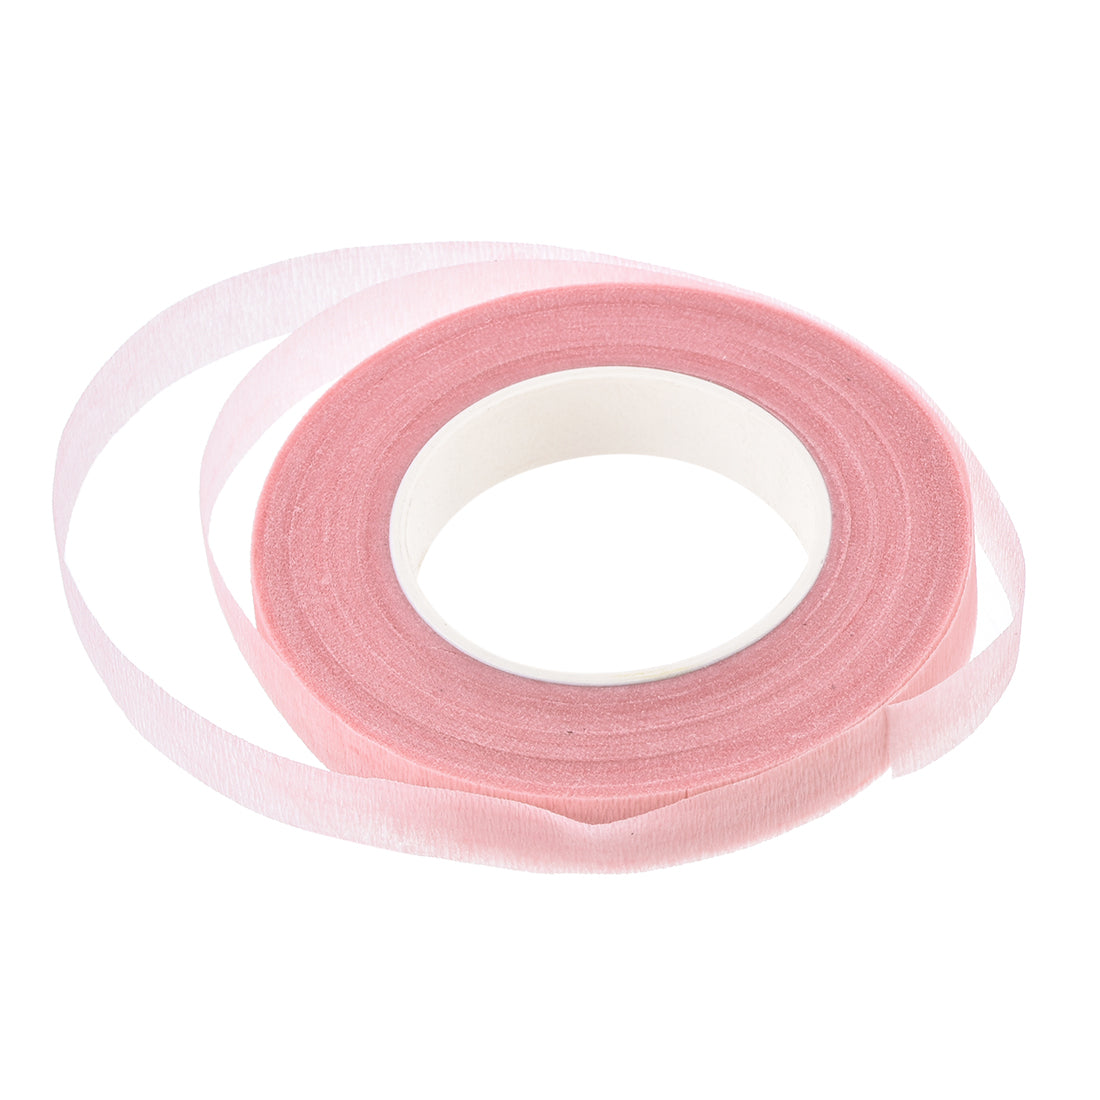 uxcell Uxcell 2Roll 1/2"x30Yard Pink Floral Tape Flower Adhesives Floral Arrangement Kit